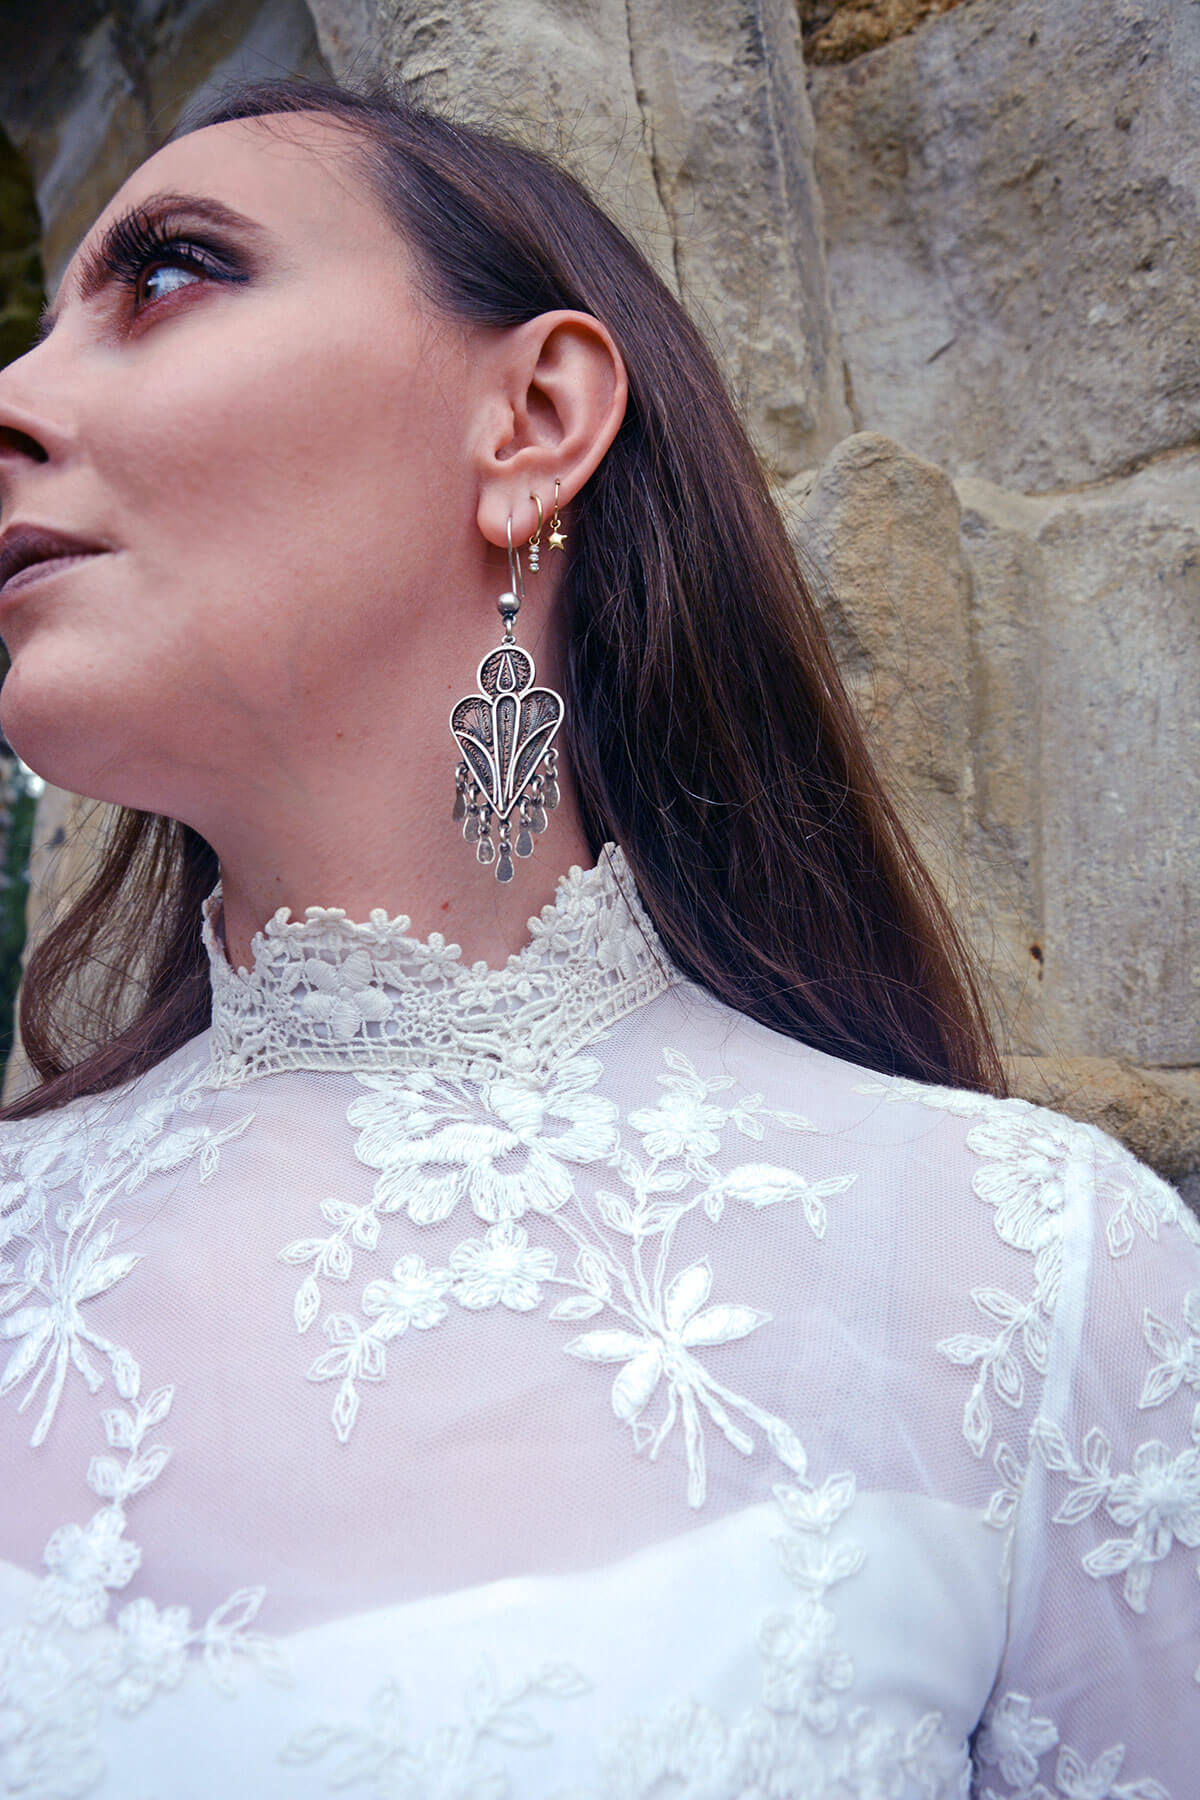 Jewellery Influencer in Silver Jewelery Gothic Ghost Look